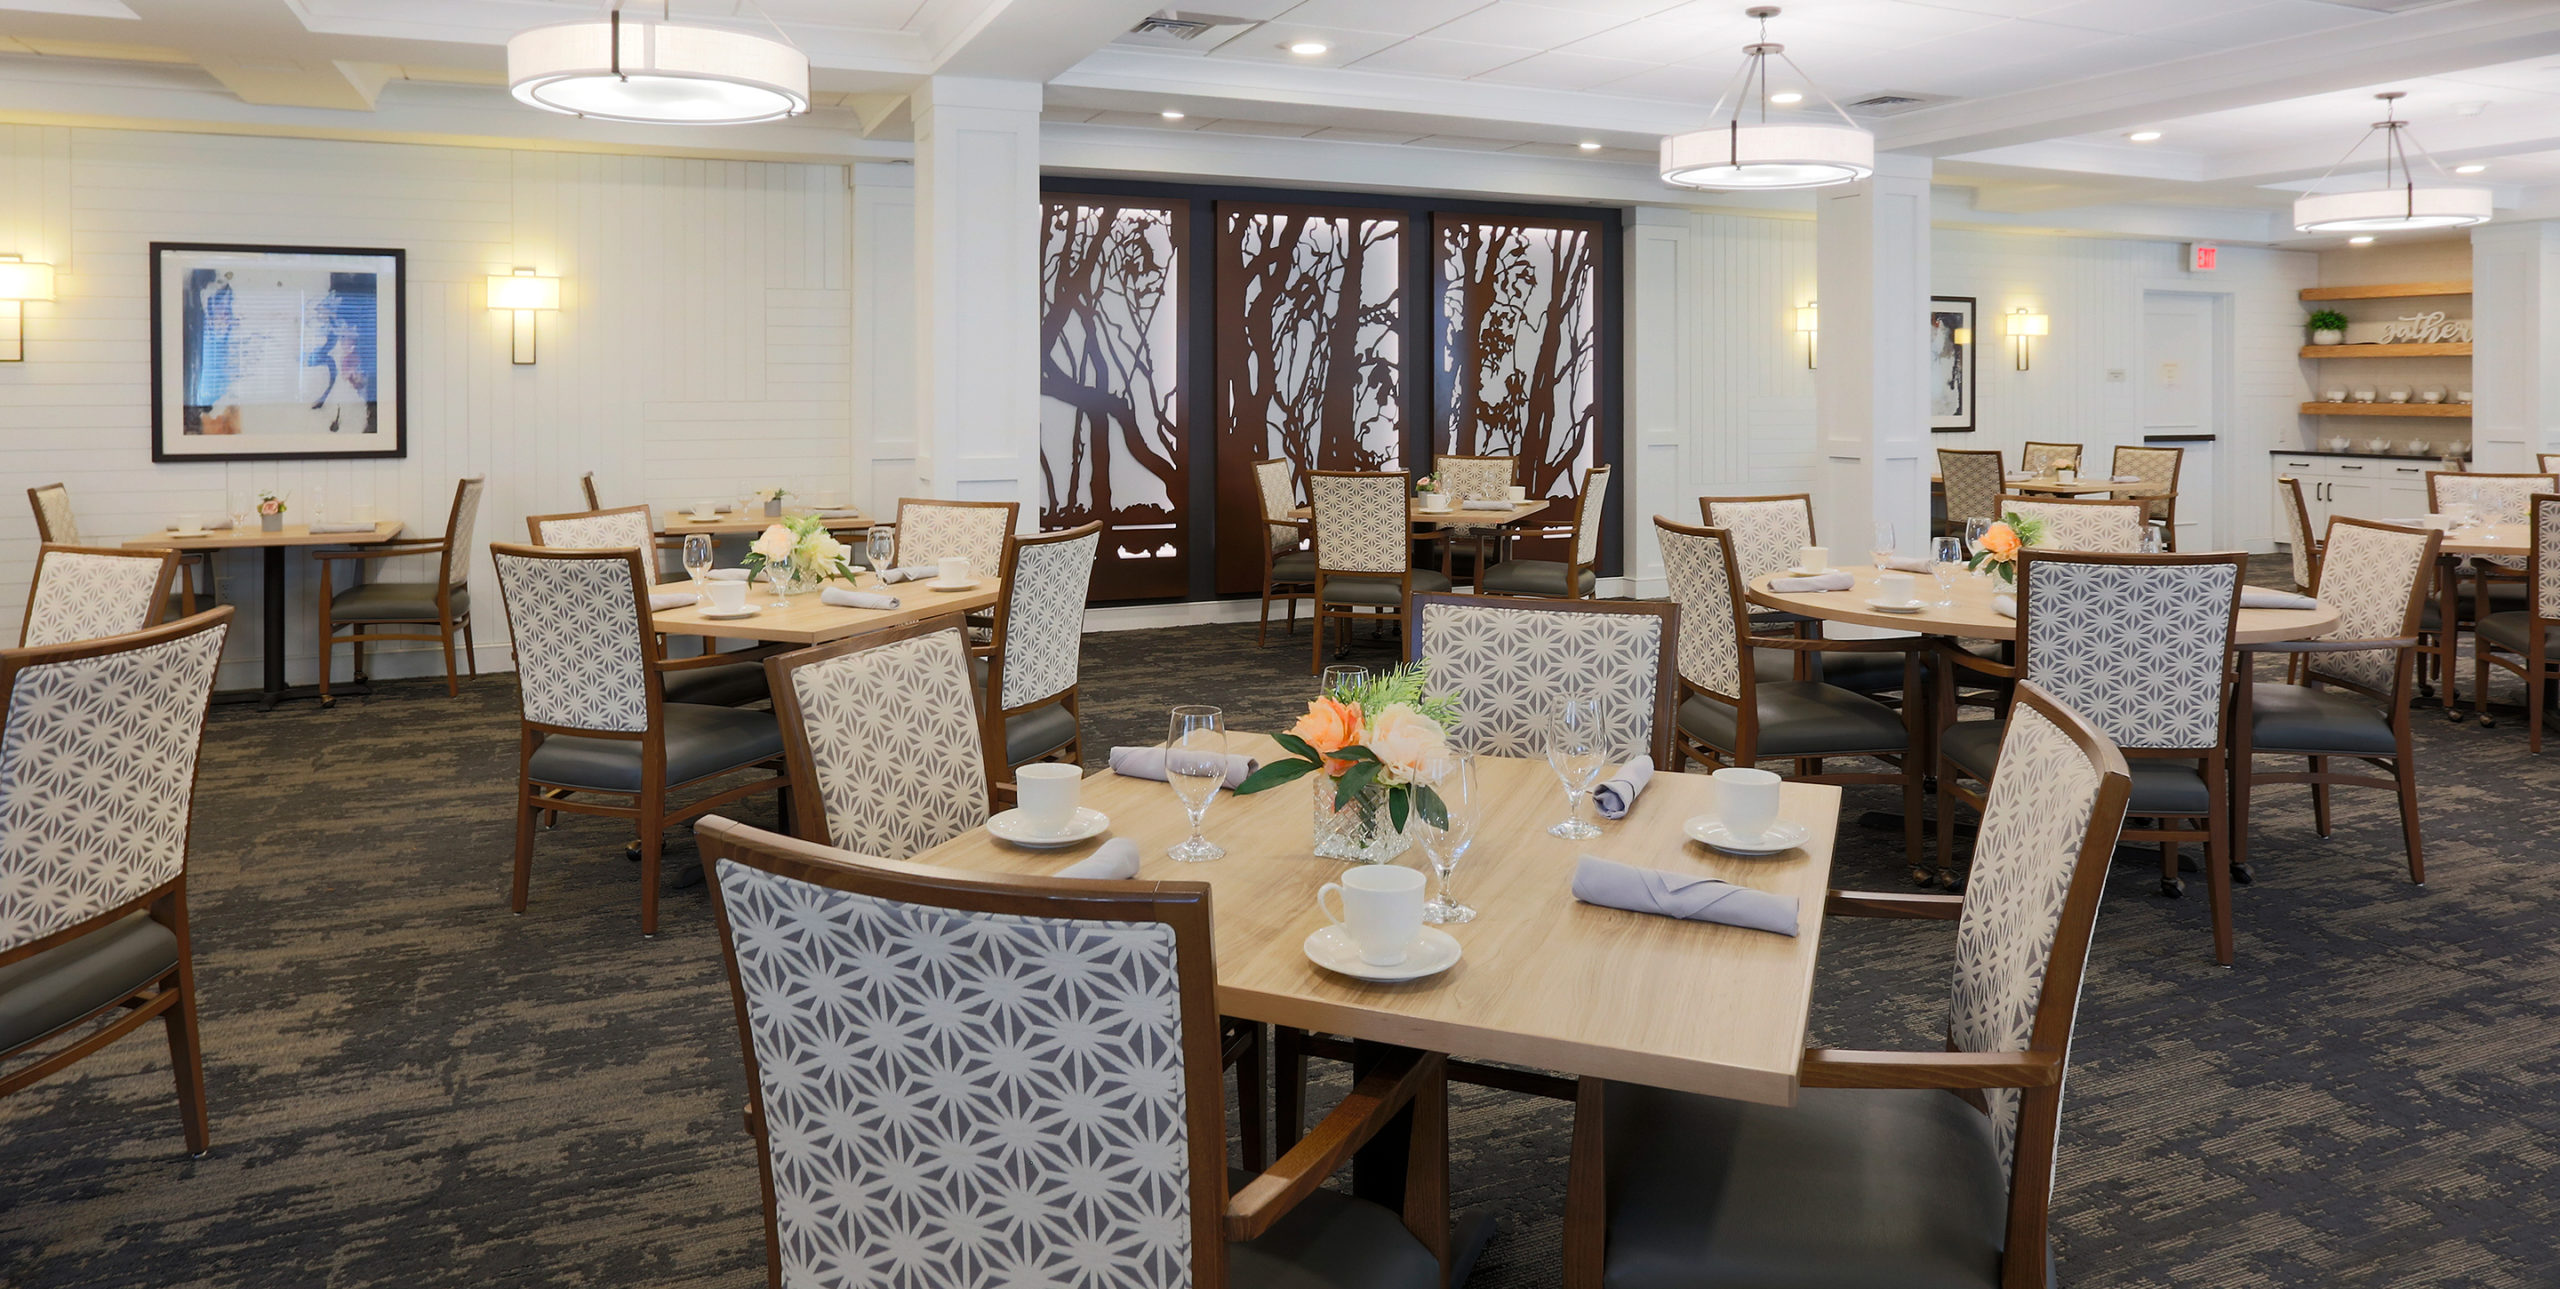 Dining room seating of four chairs to a table at Brightview Senior Living in Sayville, NY